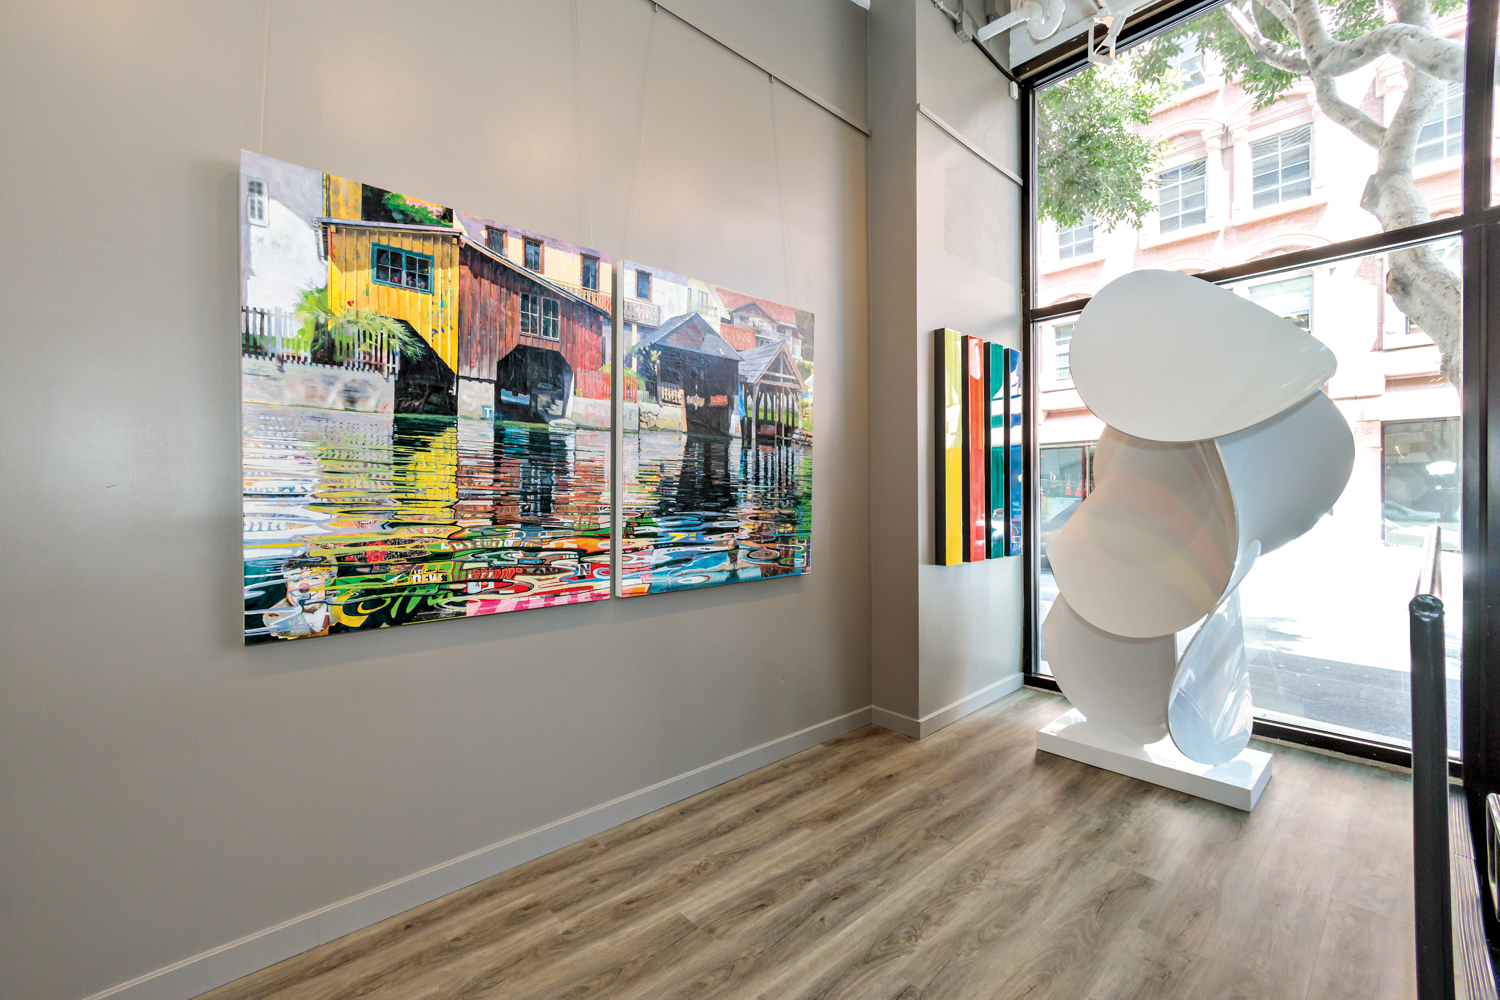 Gallery with gray walls featuring colorful artworks and a white sculpture by Stephanie Breitbard